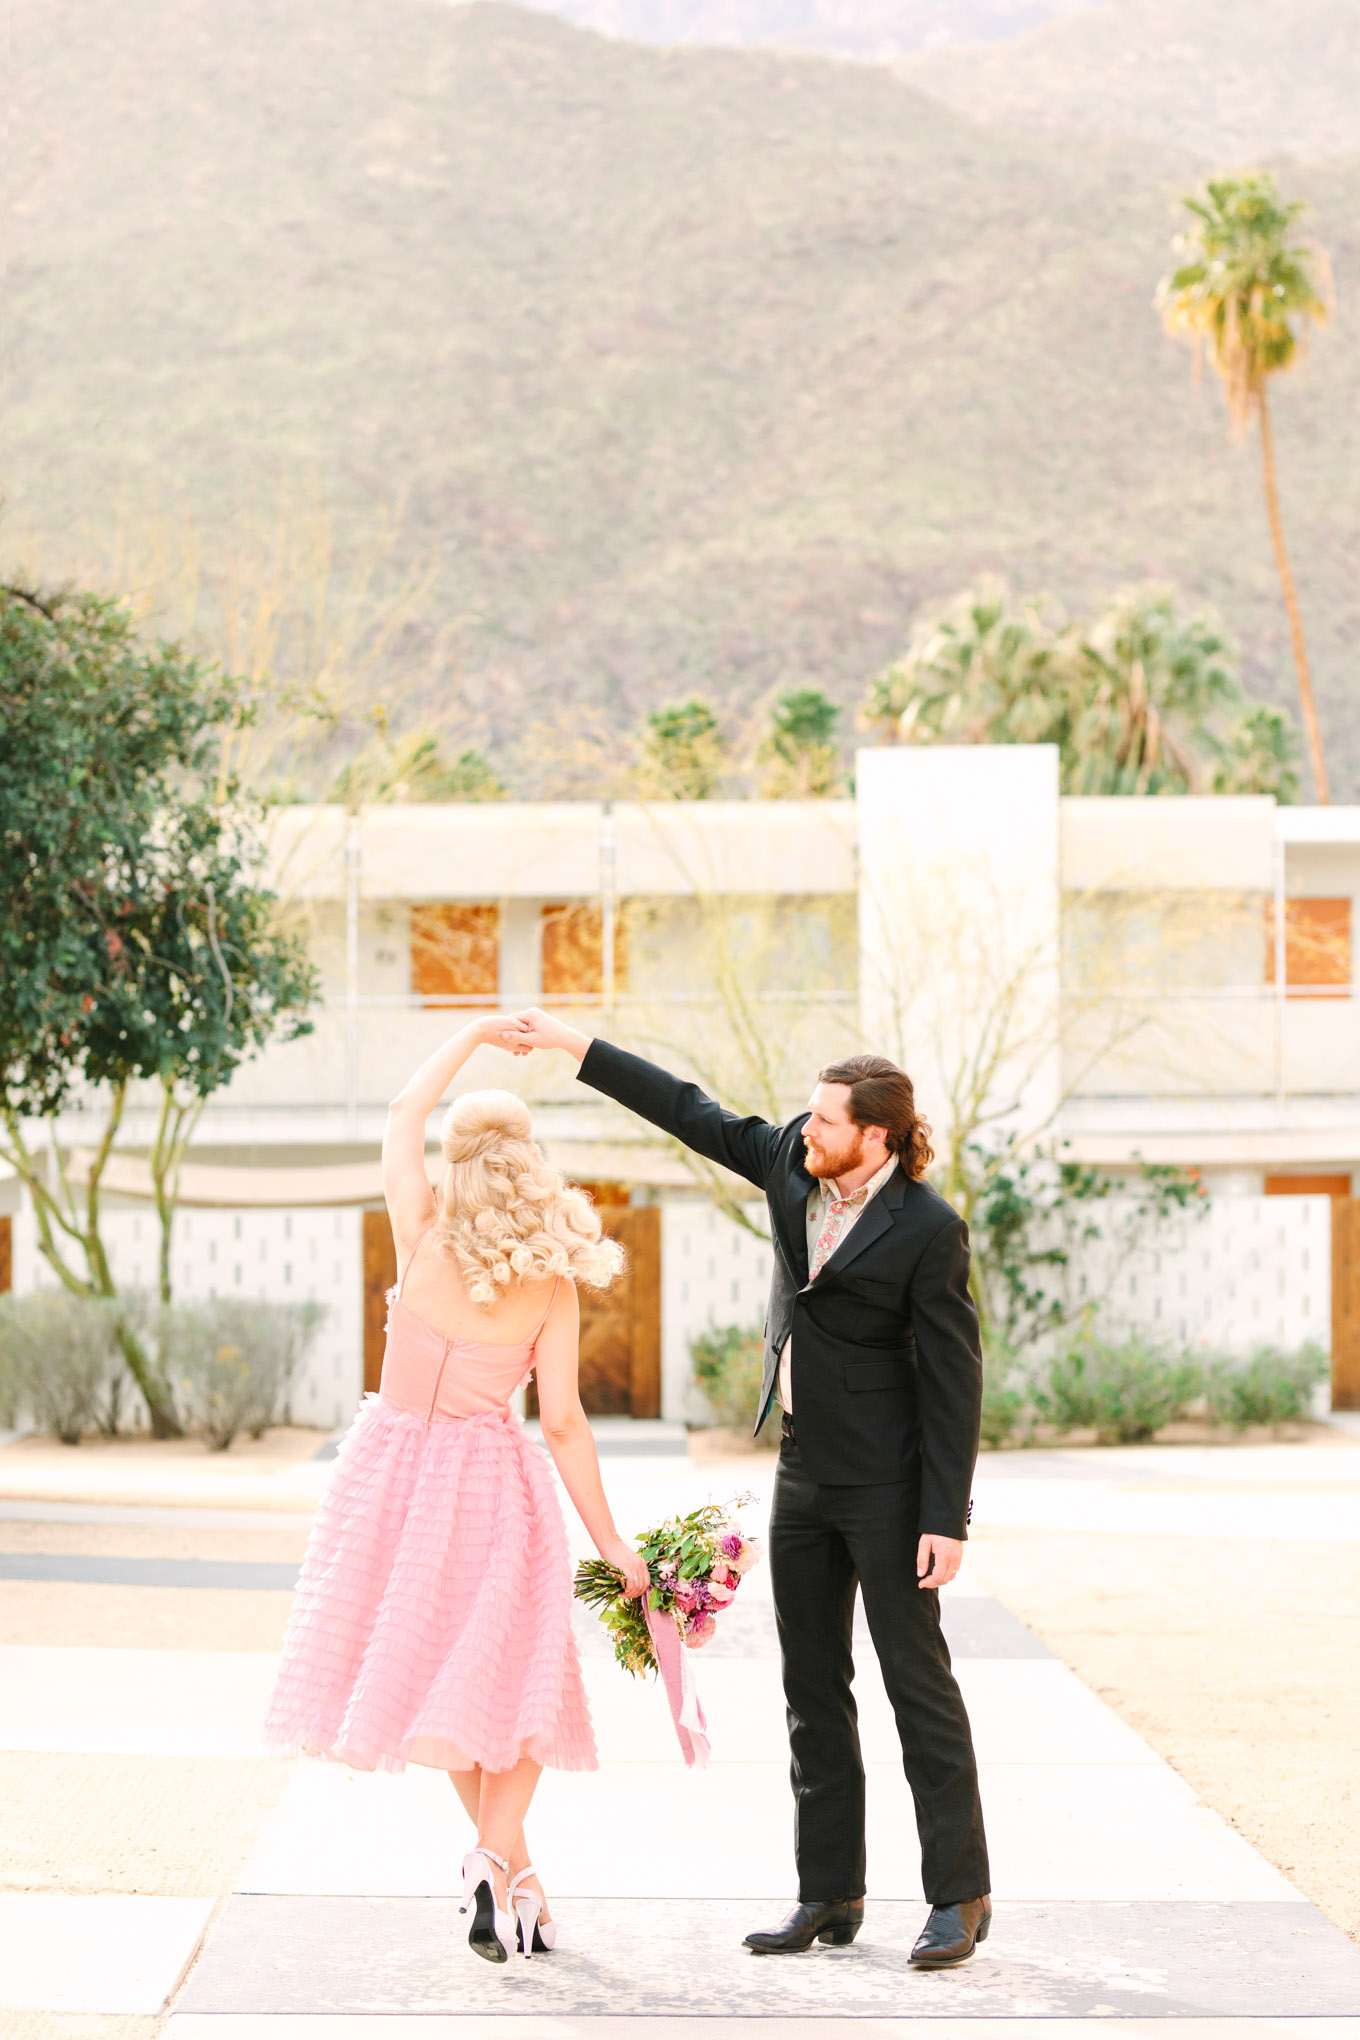 Couple twirling at Ace Hotel. Modern vintage-inspired Palm Springs engagement session with a 1960s pink Cadillac, retro clothing, and flowers by Shindig Chic. | Colorful and elevated wedding inspiration for fun-loving couples in Southern California | #engagementsession #PalmSpringsengagement #vintageweddingdress #floralcar #pinkcar   Source: Mary Costa Photography | Los Angeles